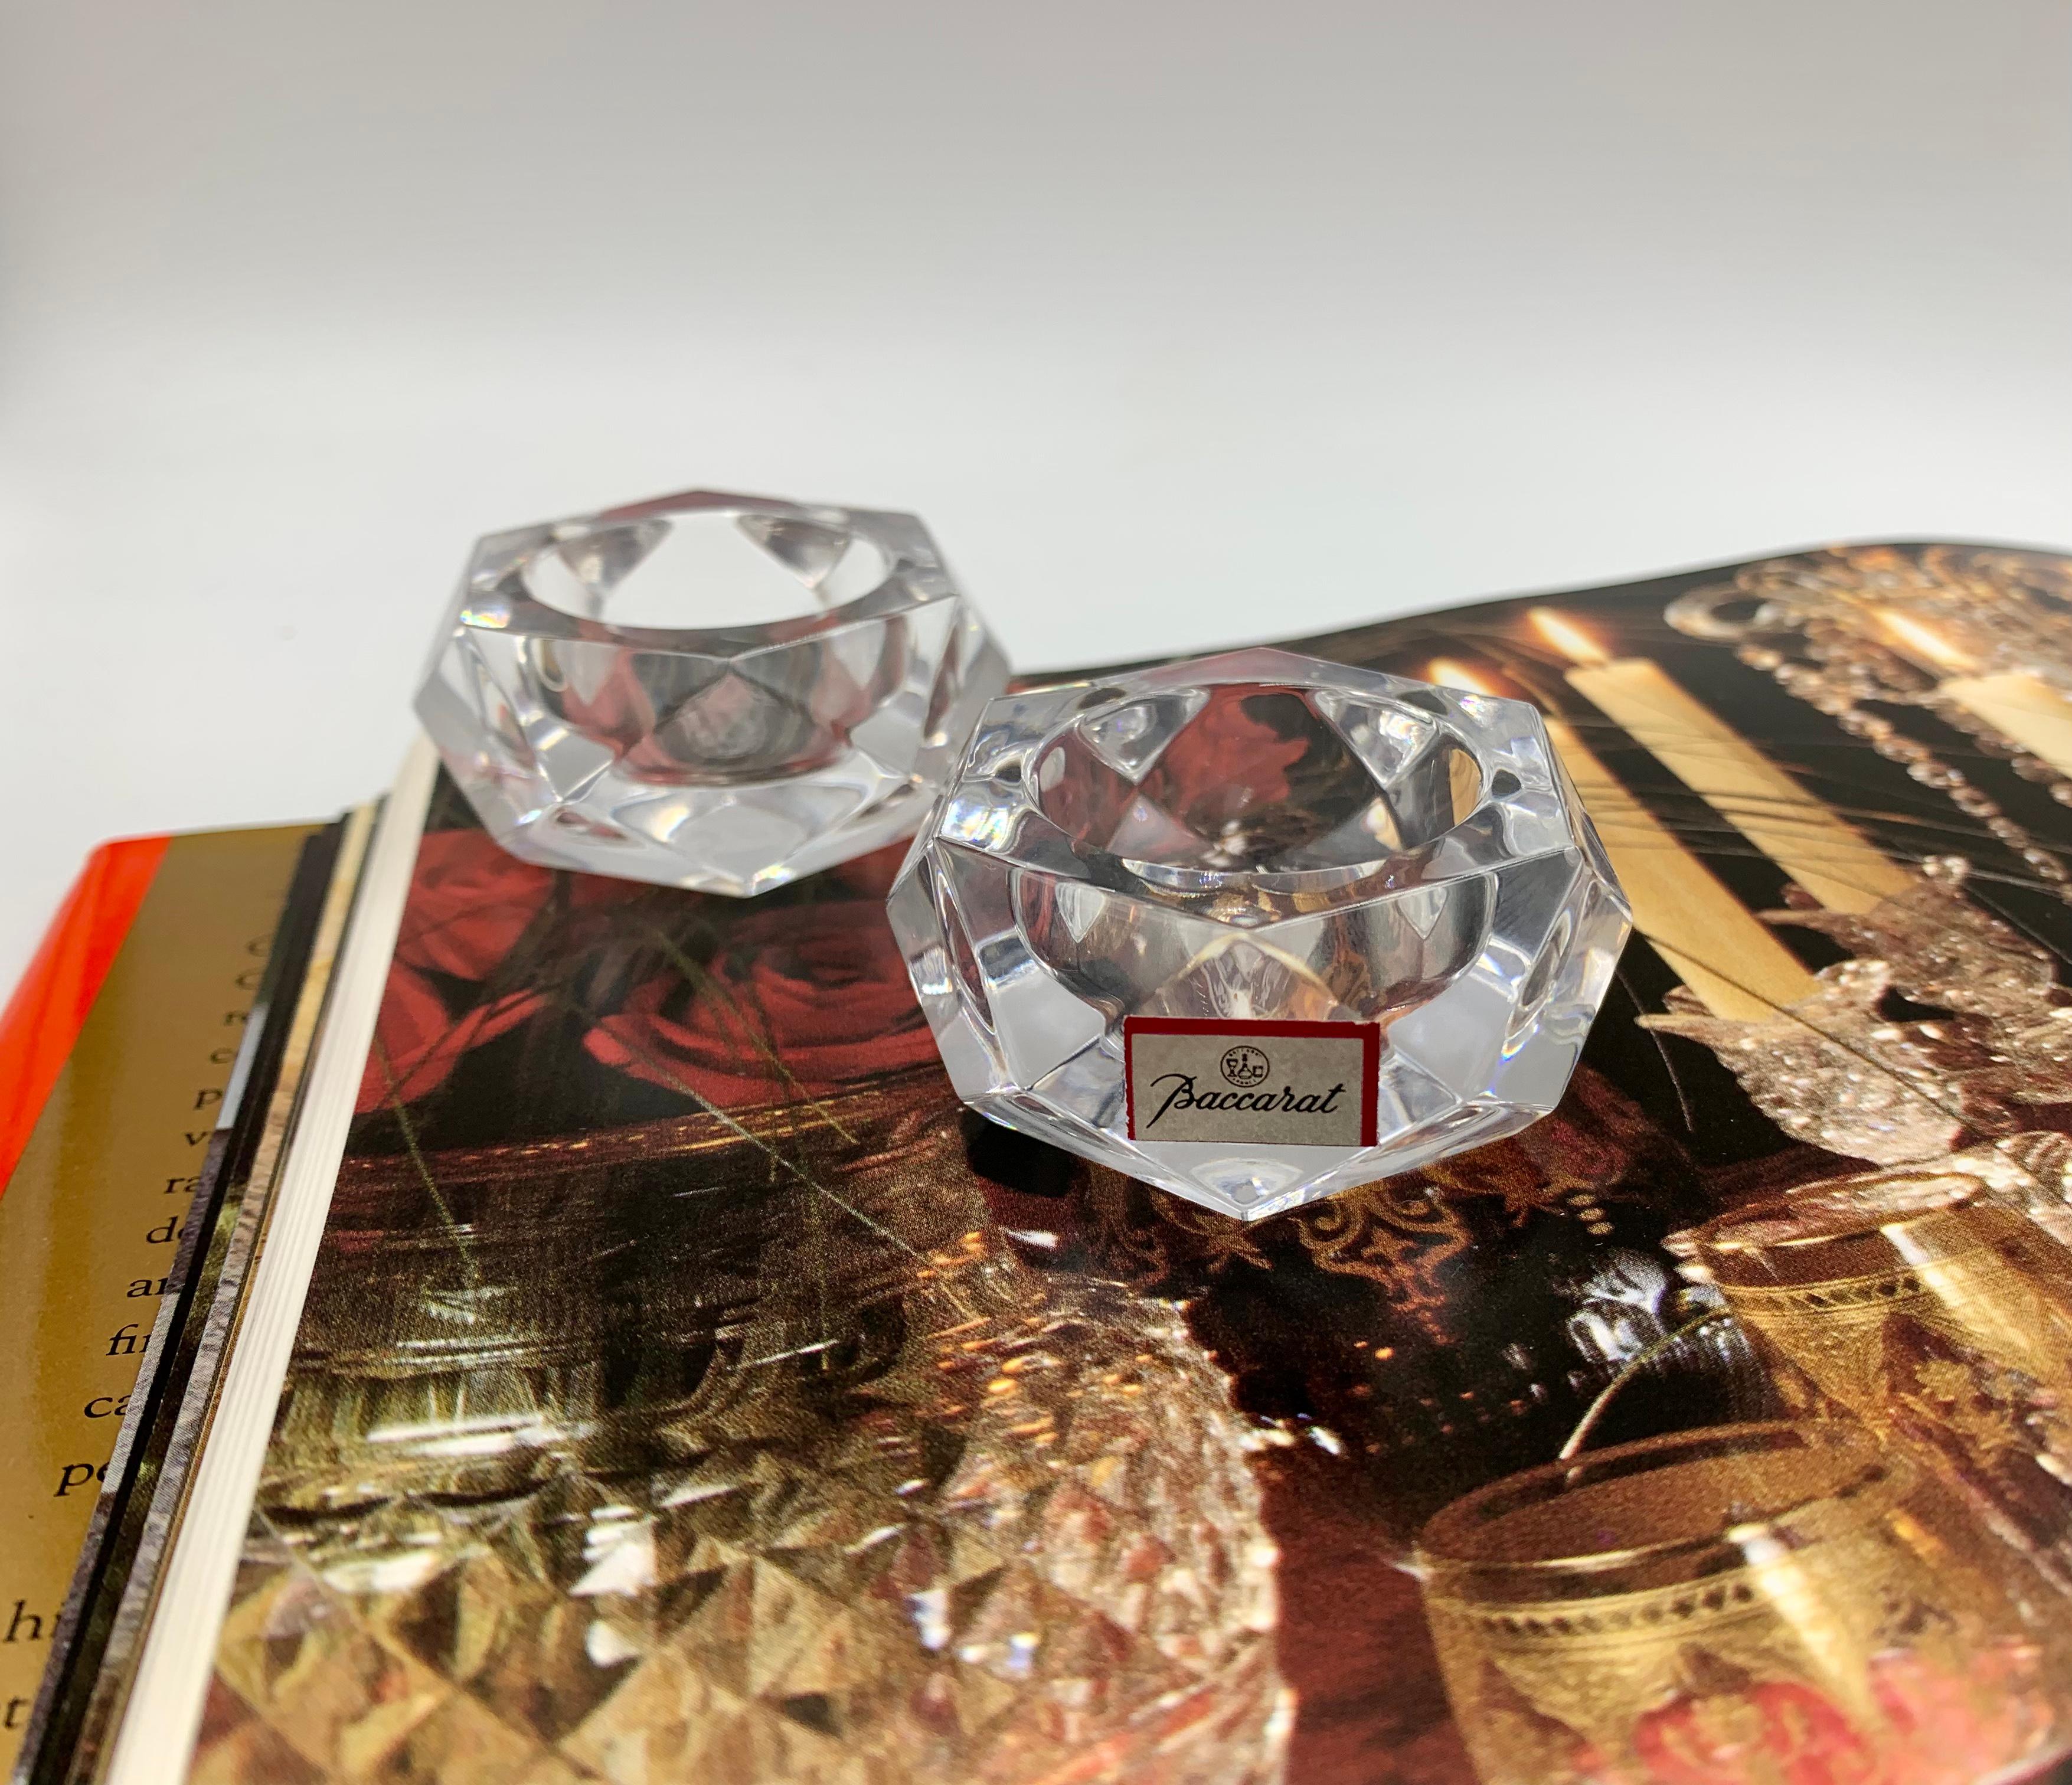 Fine pair of Baccarat crystal salt cellars in excellent condition with original label present. The sides are facet cut in rhombus and triangular shapes, the top with a circular space for the salt. Signed on the bases.
Wonderful housewarming or